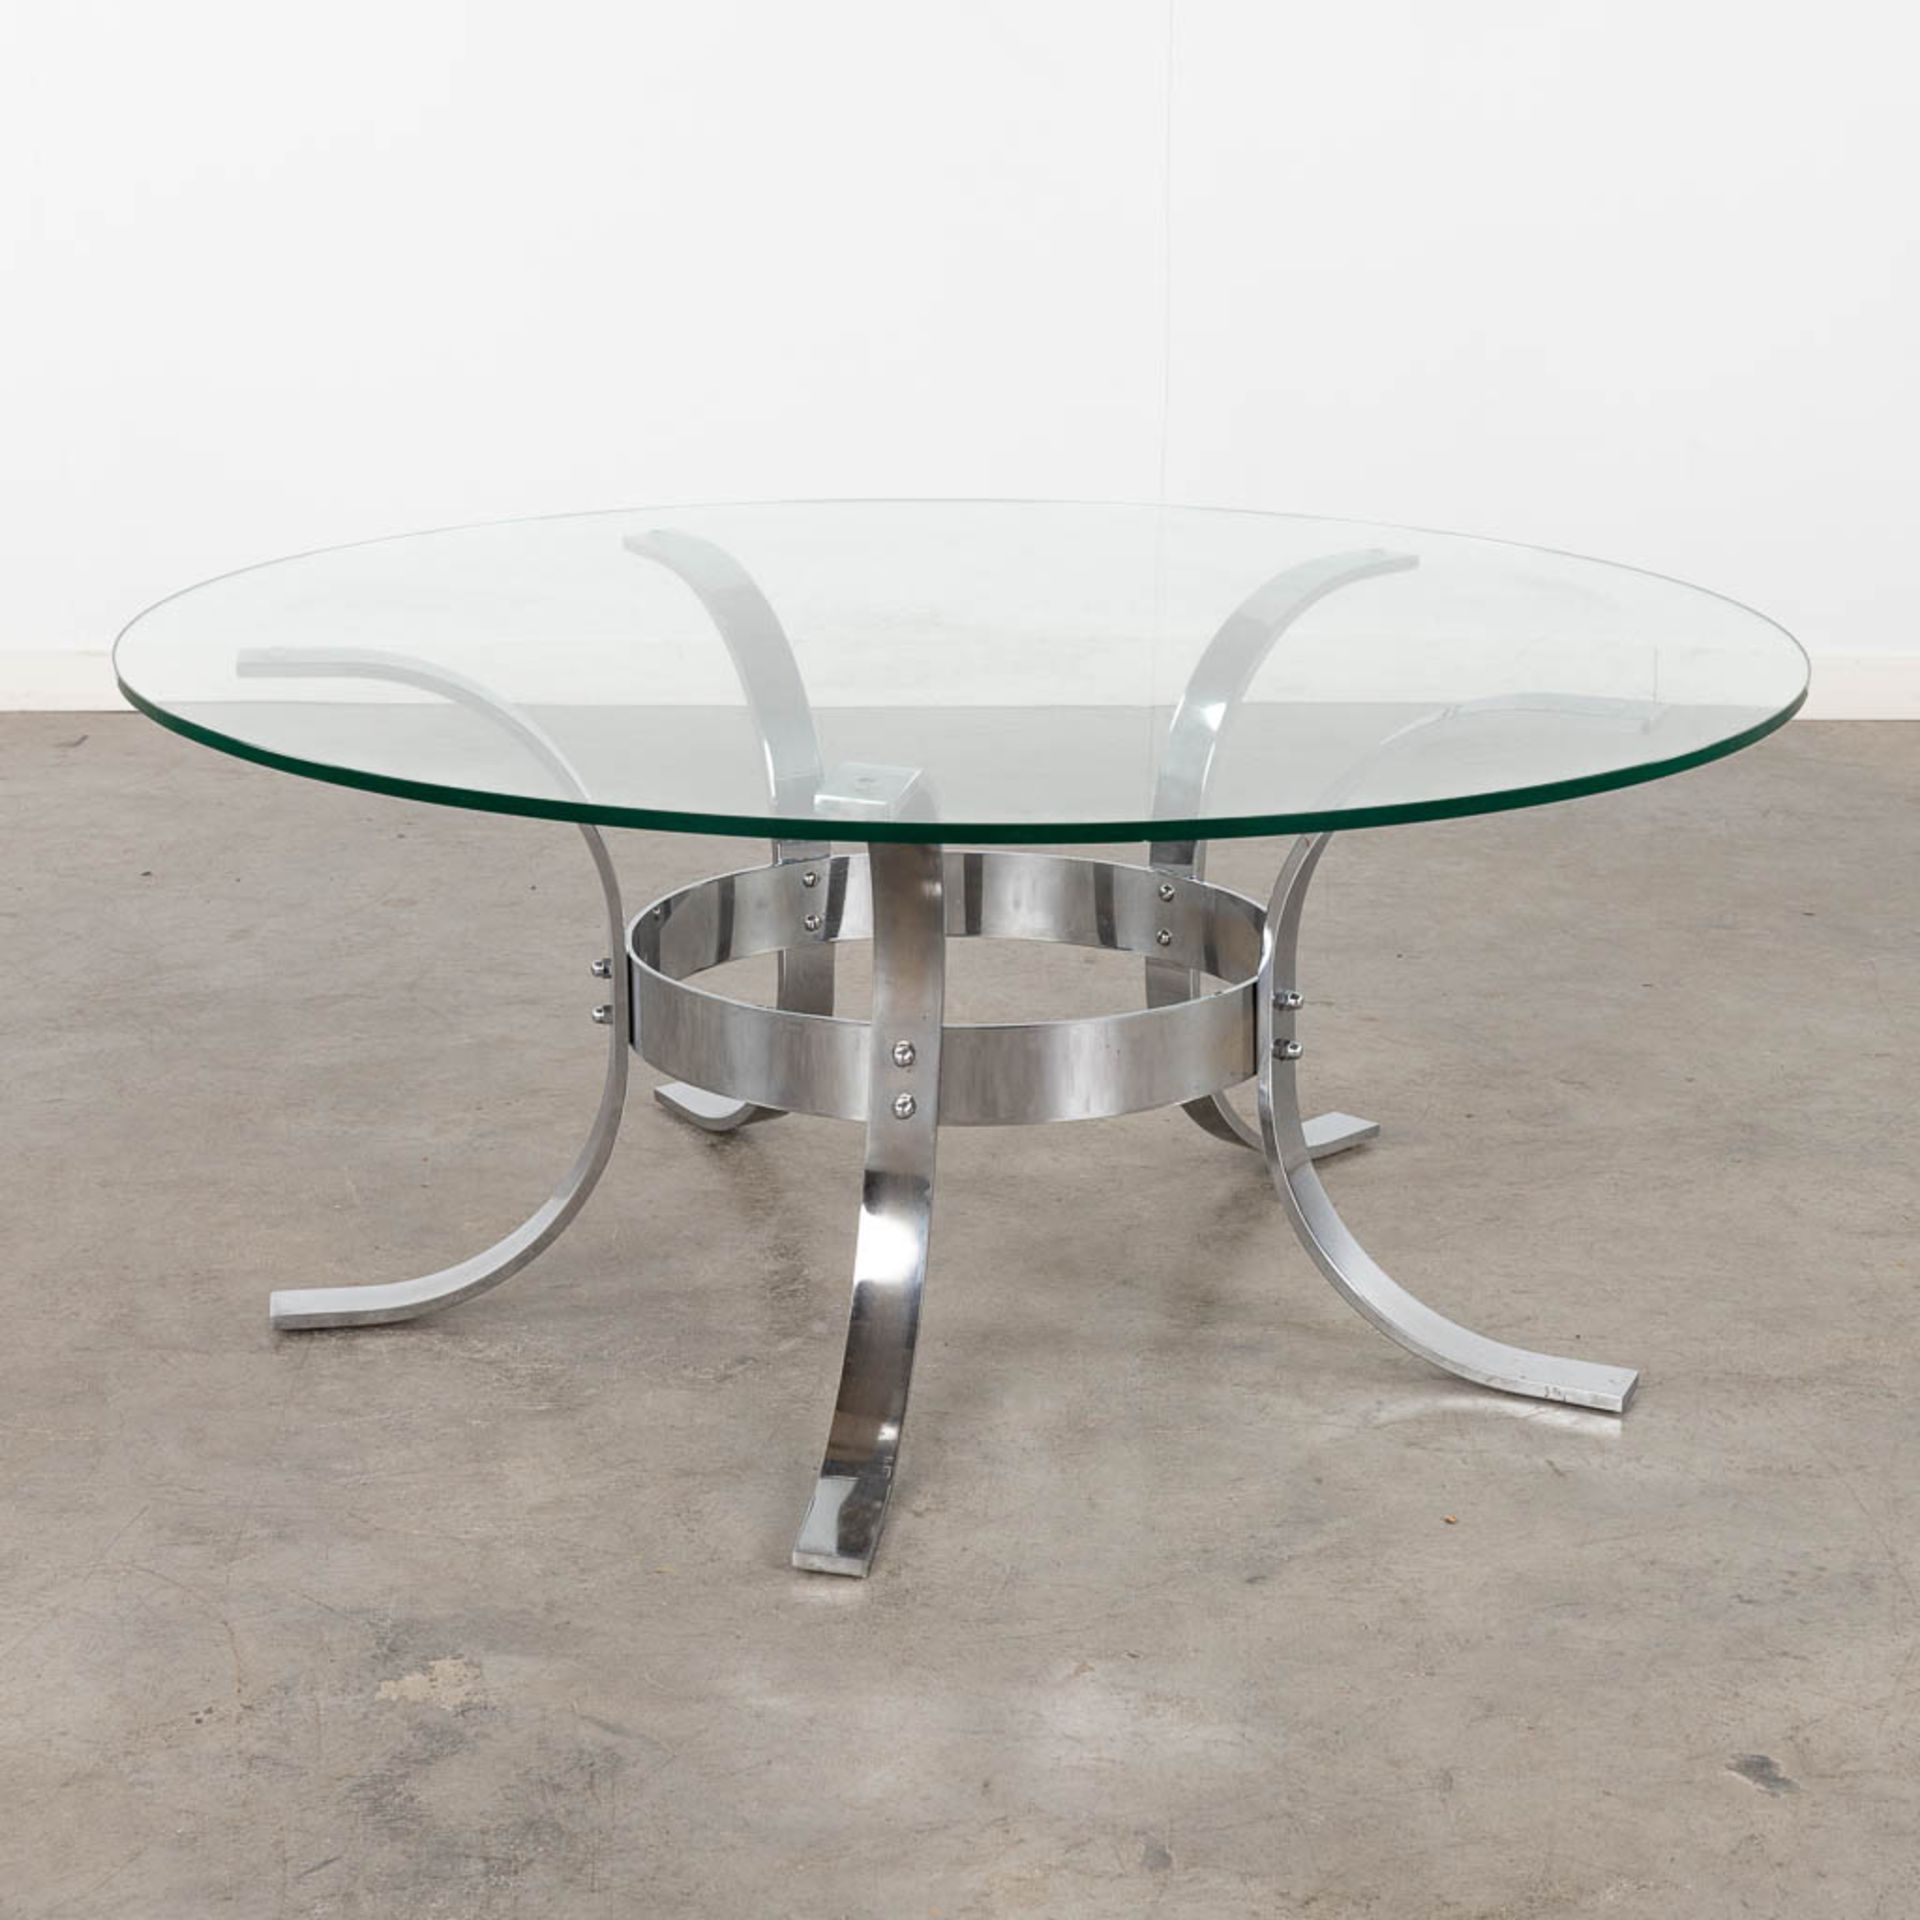 A round coffee table, chrome and glass. Circa 1970-1980. (H:42 x D:100 cm)